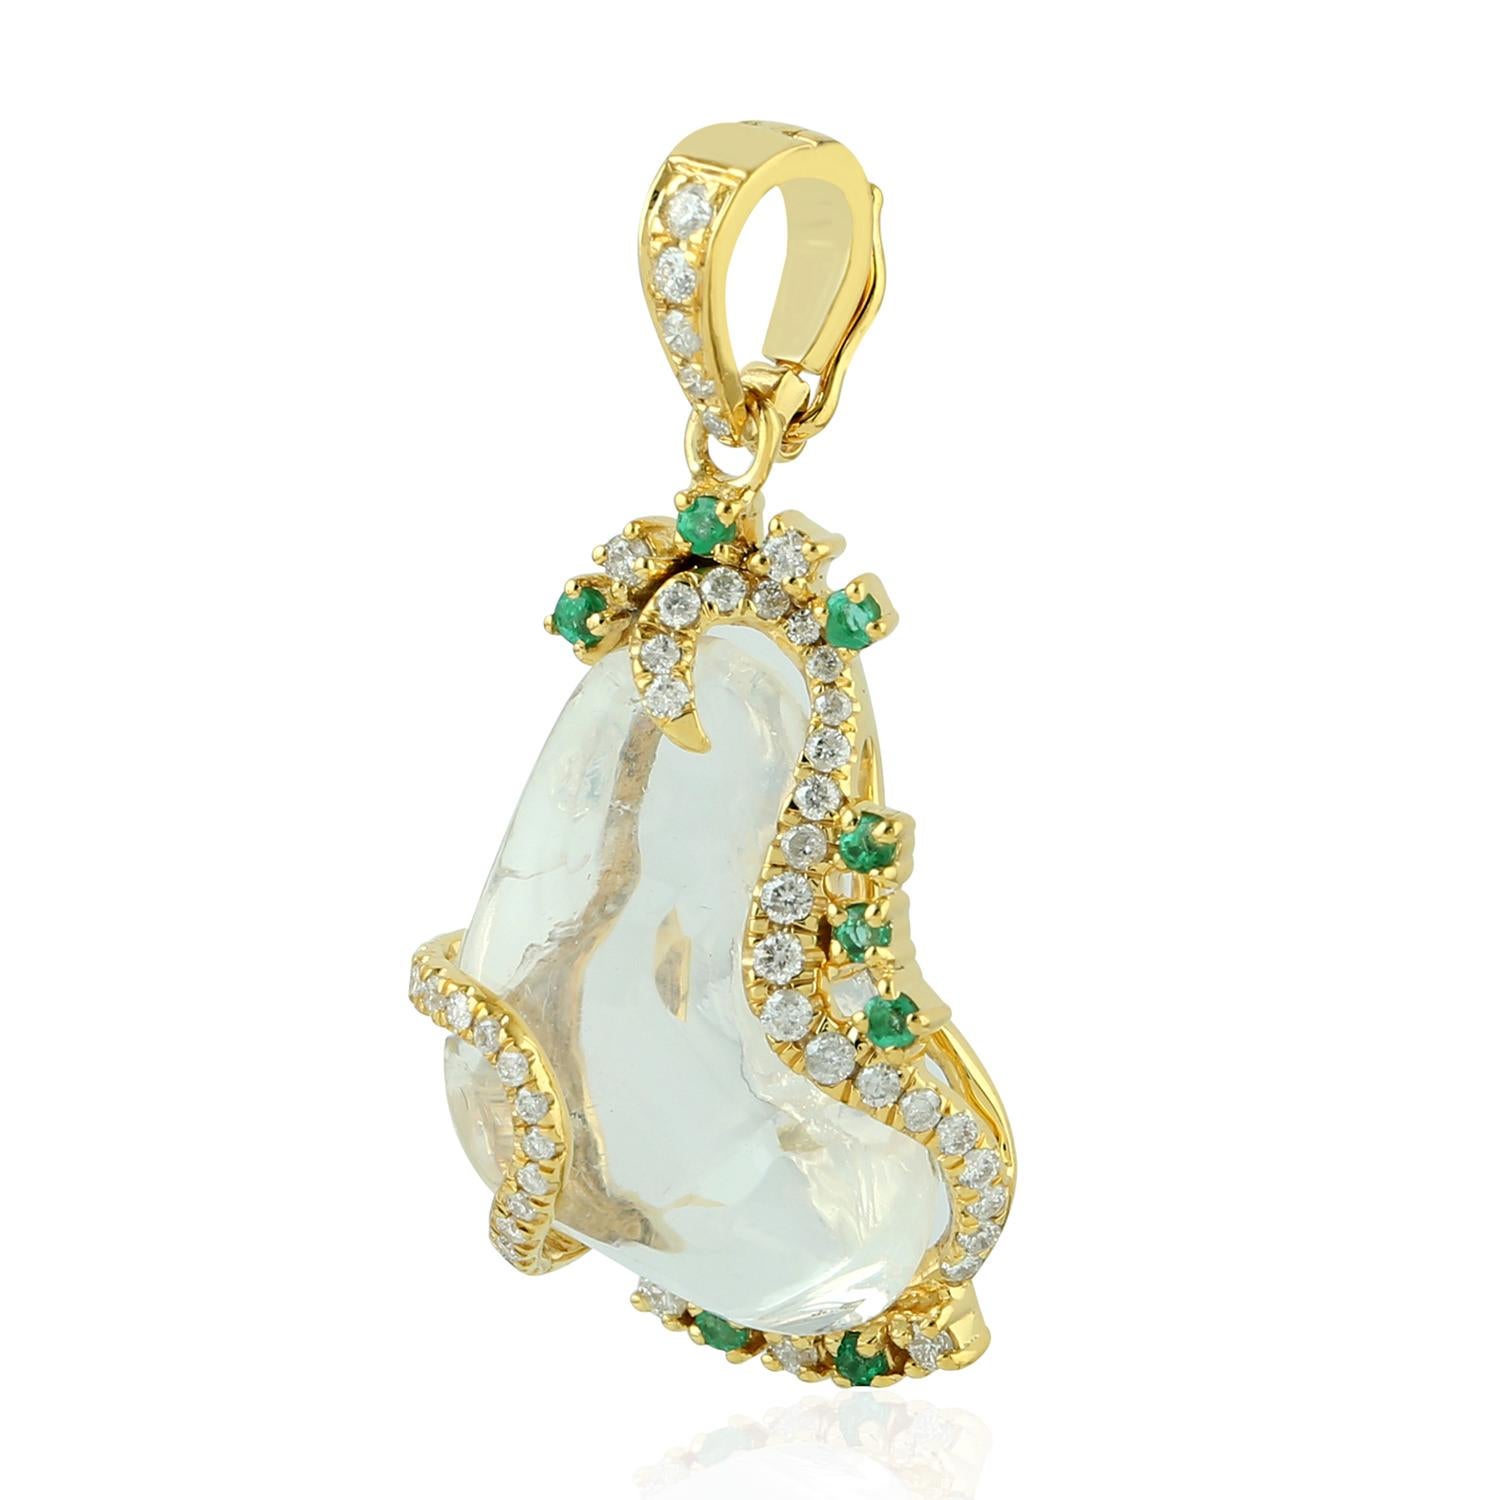 This pendant has been meticulously crafted from 18-karat gold. It is hand set with 8.08 carats Opal, .21 carats emerald & .38 carats of sparkling diamonds.

FOLLOW  MEGHNA JEWELS storefront to view the latest collection & exclusive pieces.  Meghna